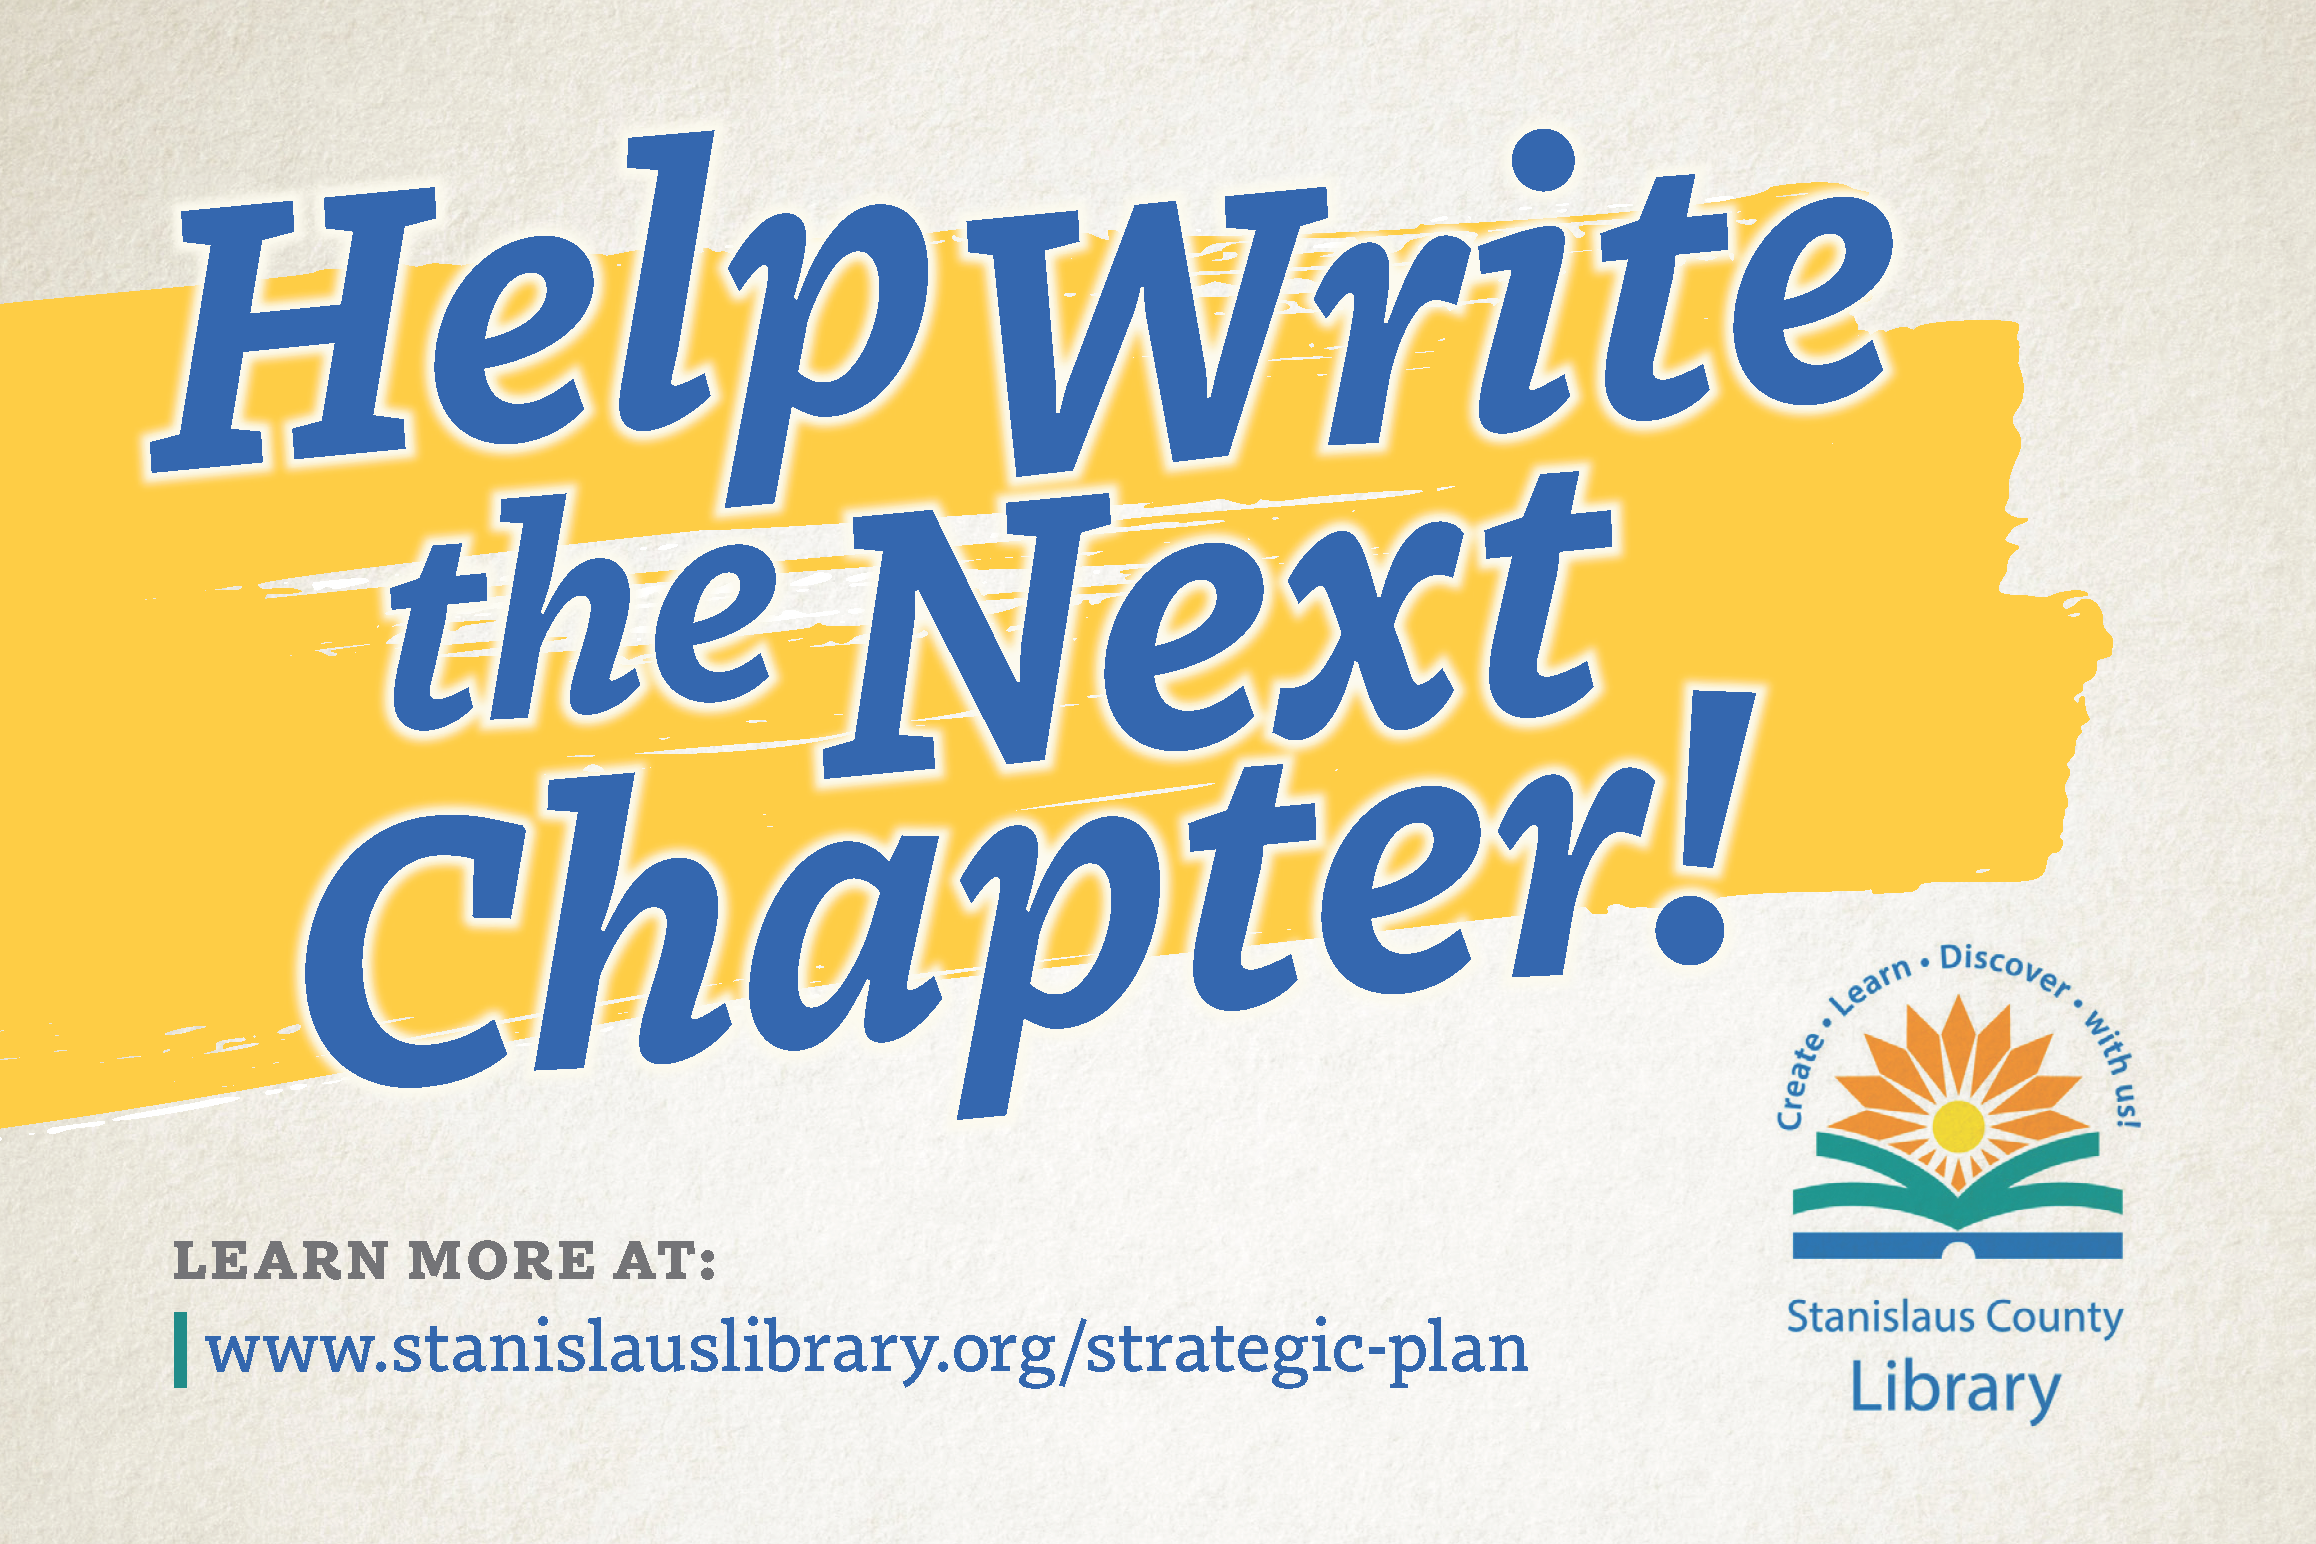 Help write the next chapter